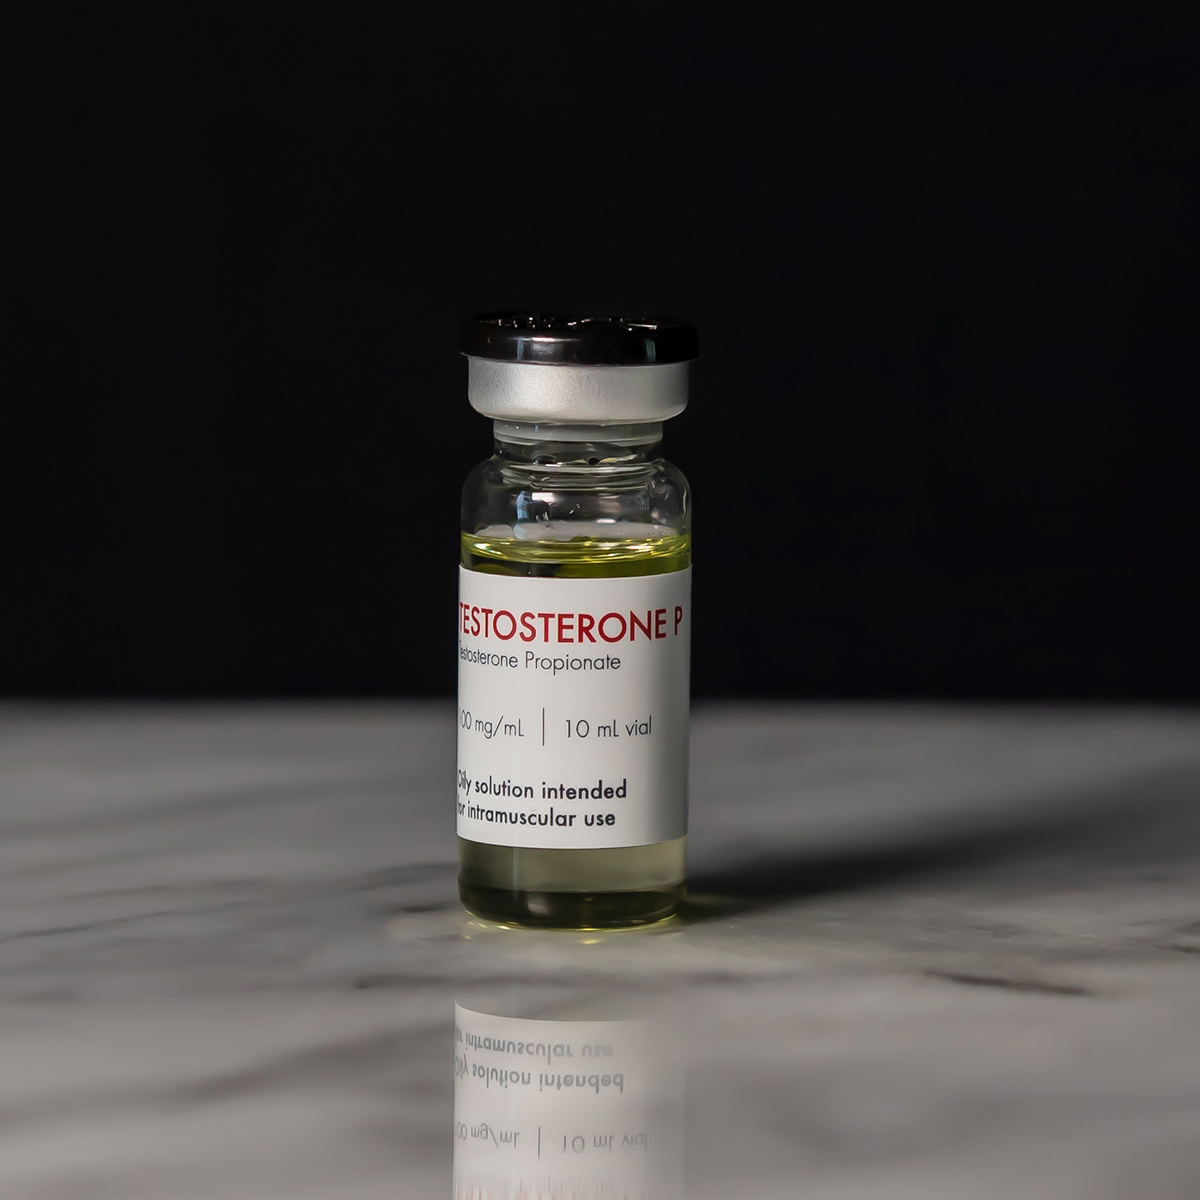 Clear image of a Testosterone Propionate product from Legacy Laboratories in Canada, showcasing the brand name, the manufacturer's name, and vital product details, indicating its role in hormone replacement therapy.